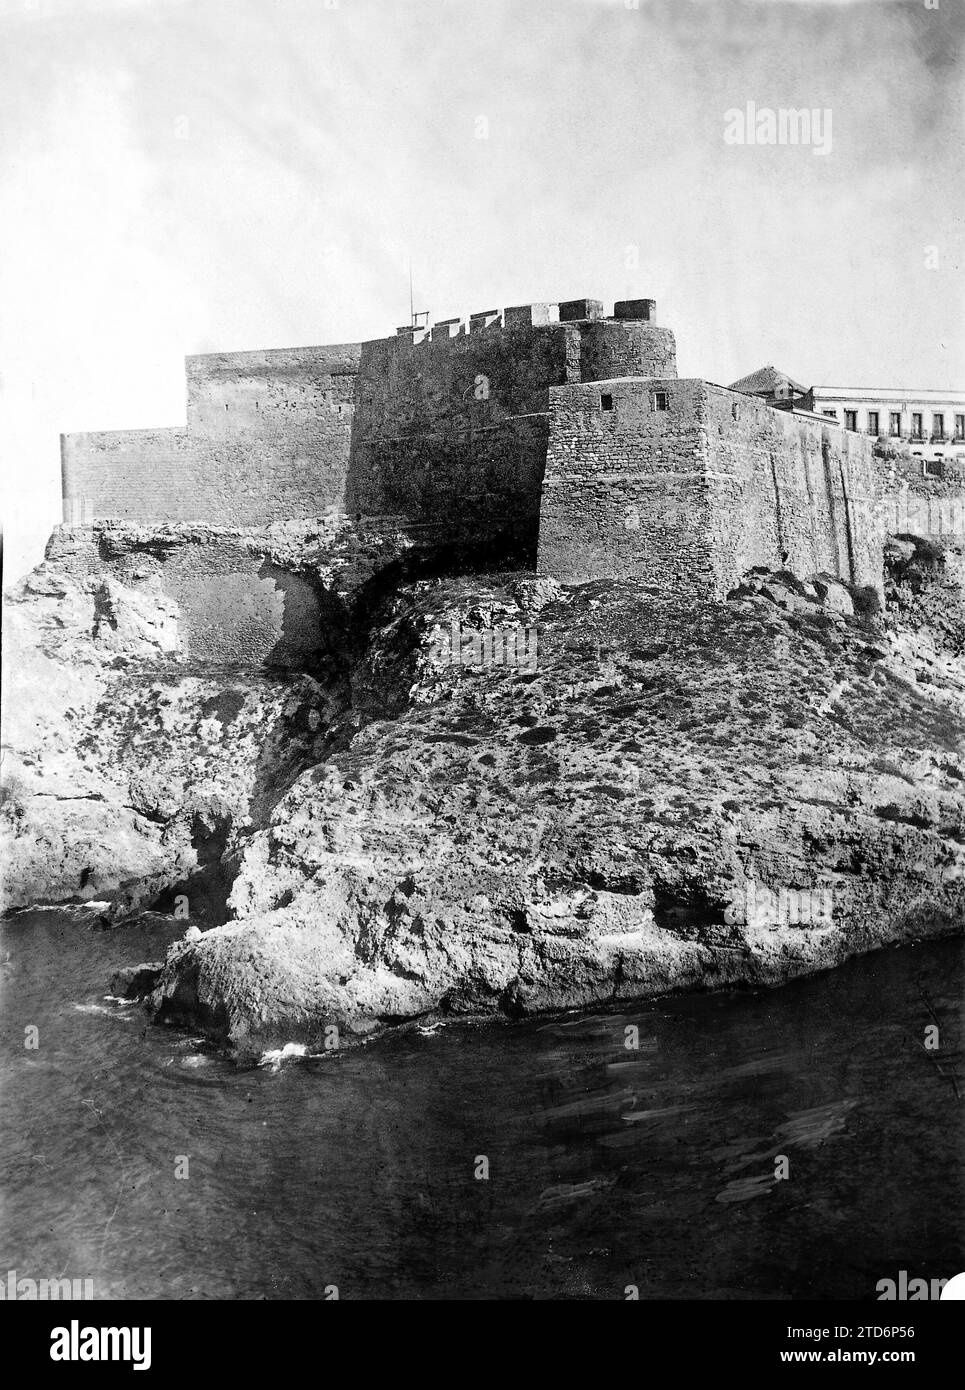 08/31/1909. View of the Ensenada del Galápago and the old fort immediately behind A lo que Fue presidio taken from the sea. Credit: Album / Archivo ABC / Ramón Alba Stock Photo